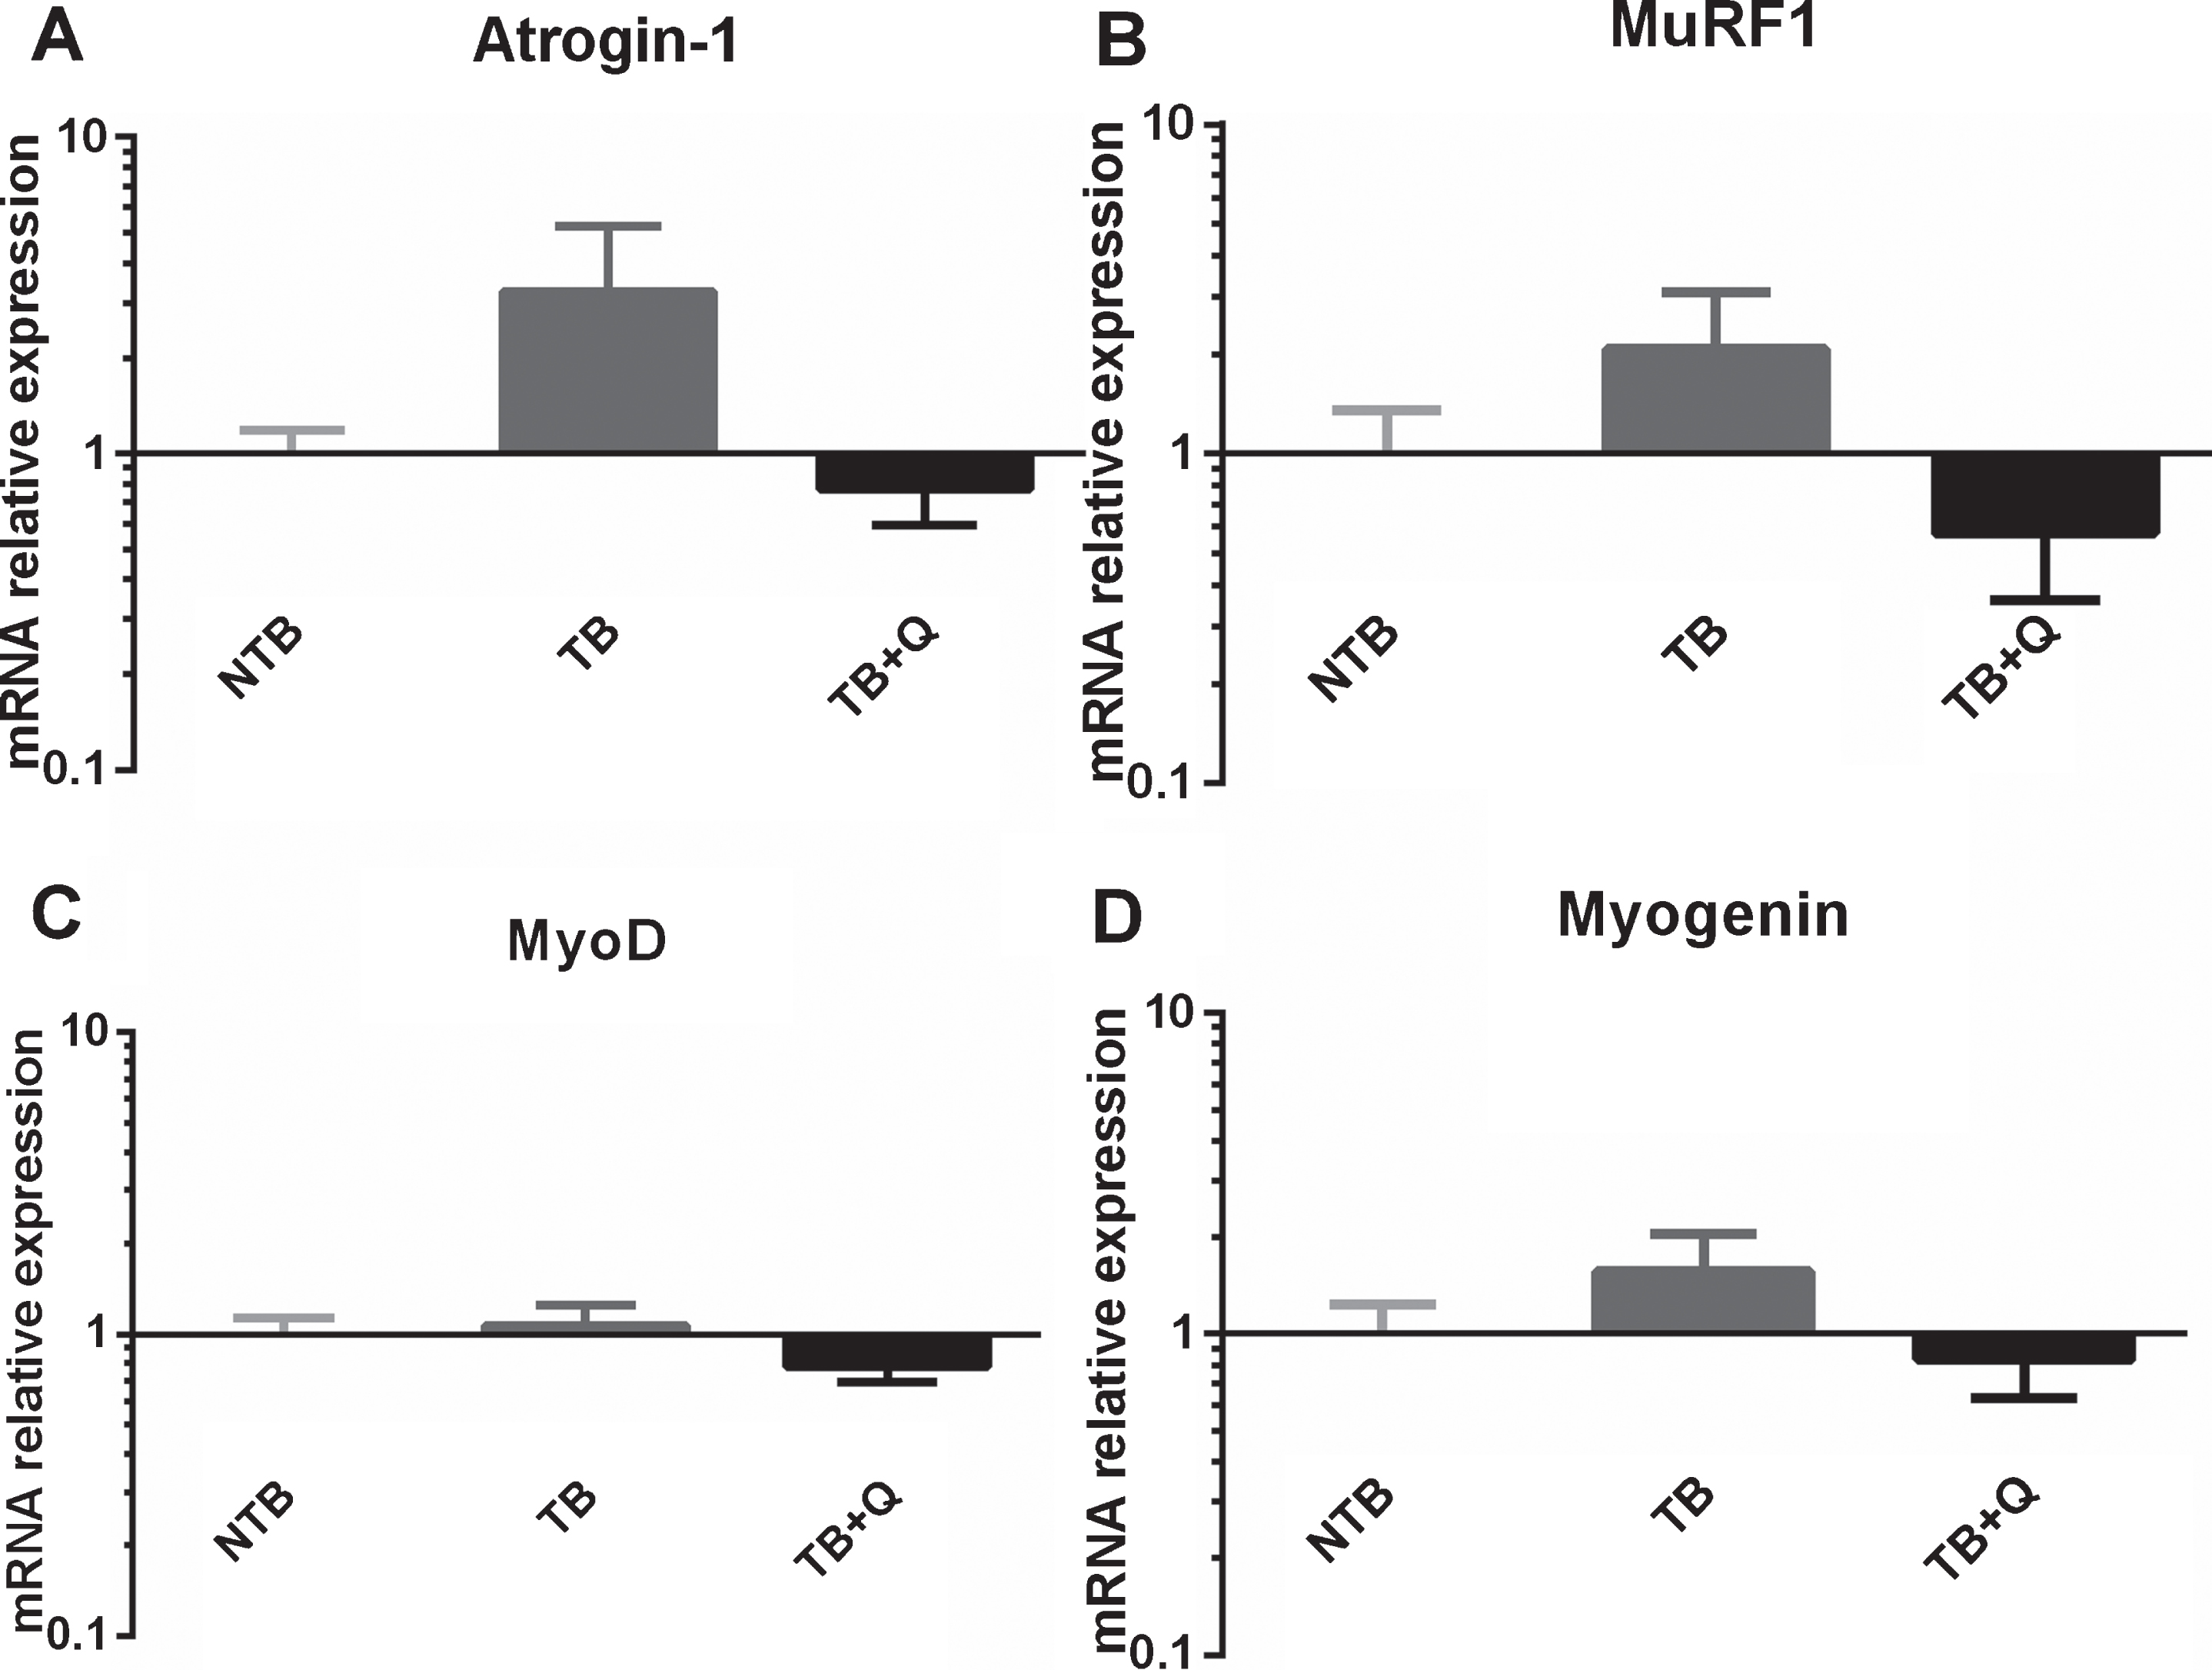 mRNA expression levels in cachectic muscle. Bar graphs depicting the mean±SEM mRNA expression levels in gastrocnemius muscle of (A) Atrogin-1, (B) MuRF1, (C) MyoD and (D) Myogenin in non-tumor-bearing male CD2F1 mice (NTB, n = 10), C26 tumor-bearing (TB) mice with ad libitum access to regular chow (C26 TB, n = 10) and mice with ad libitum access to quercetin supplemented chow (TB + Q, n = 10). Multiple group comparisons were done by one-way ANOVA with a Bonferroni’s posthoc test. All groups were compared against TB mice. A substantial but non-significant difference in expression of E3 ubiquitin ligase atrogin-1, and to a lesser extent MuRF1, was observed between TB and TB + Q mice.